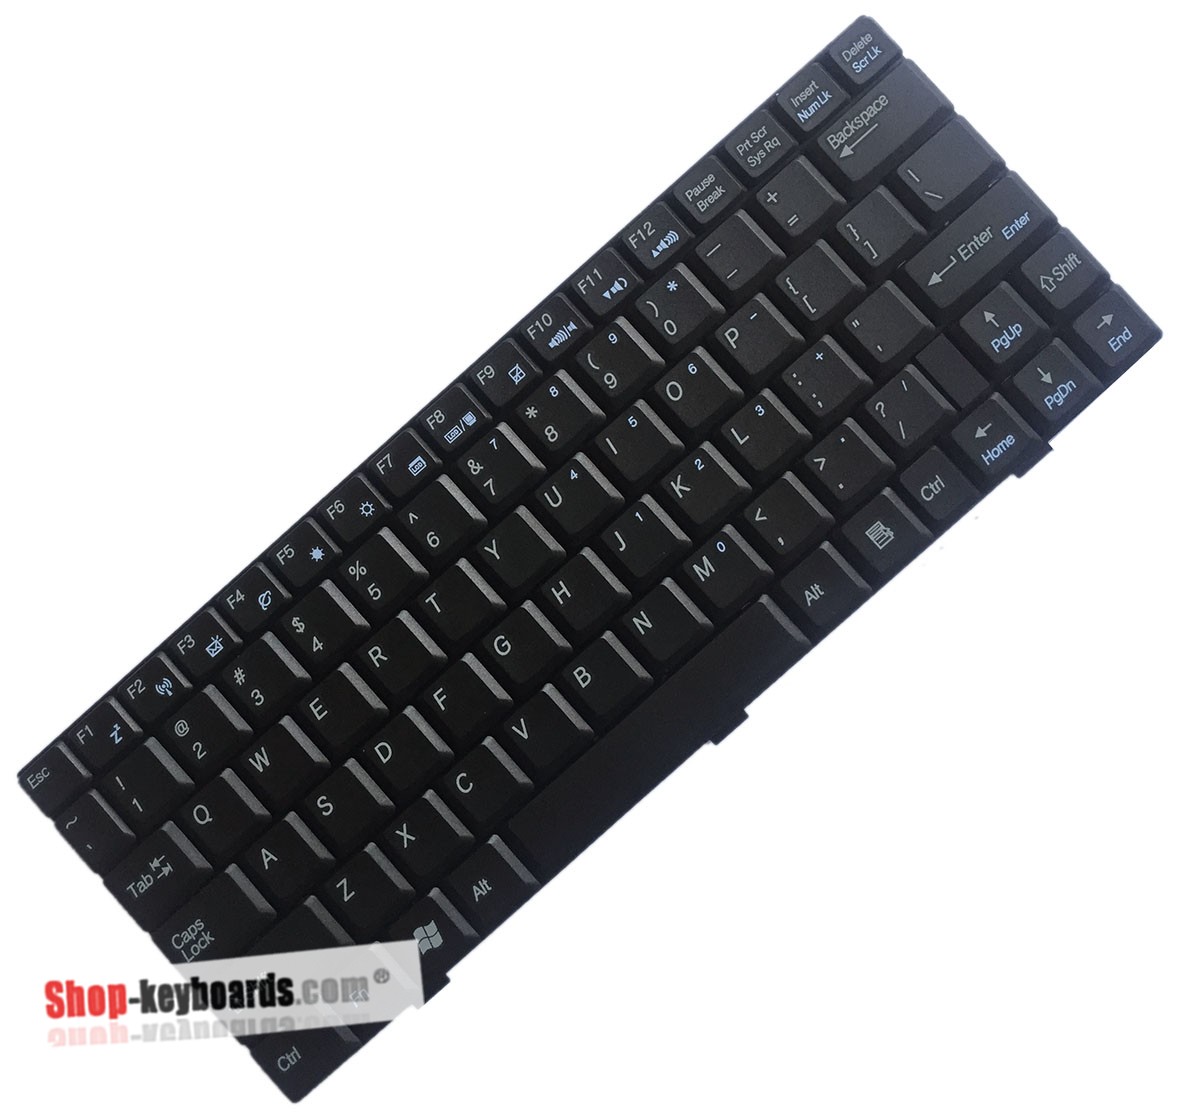 Asus Eee PC T101MT Keyboard replacement